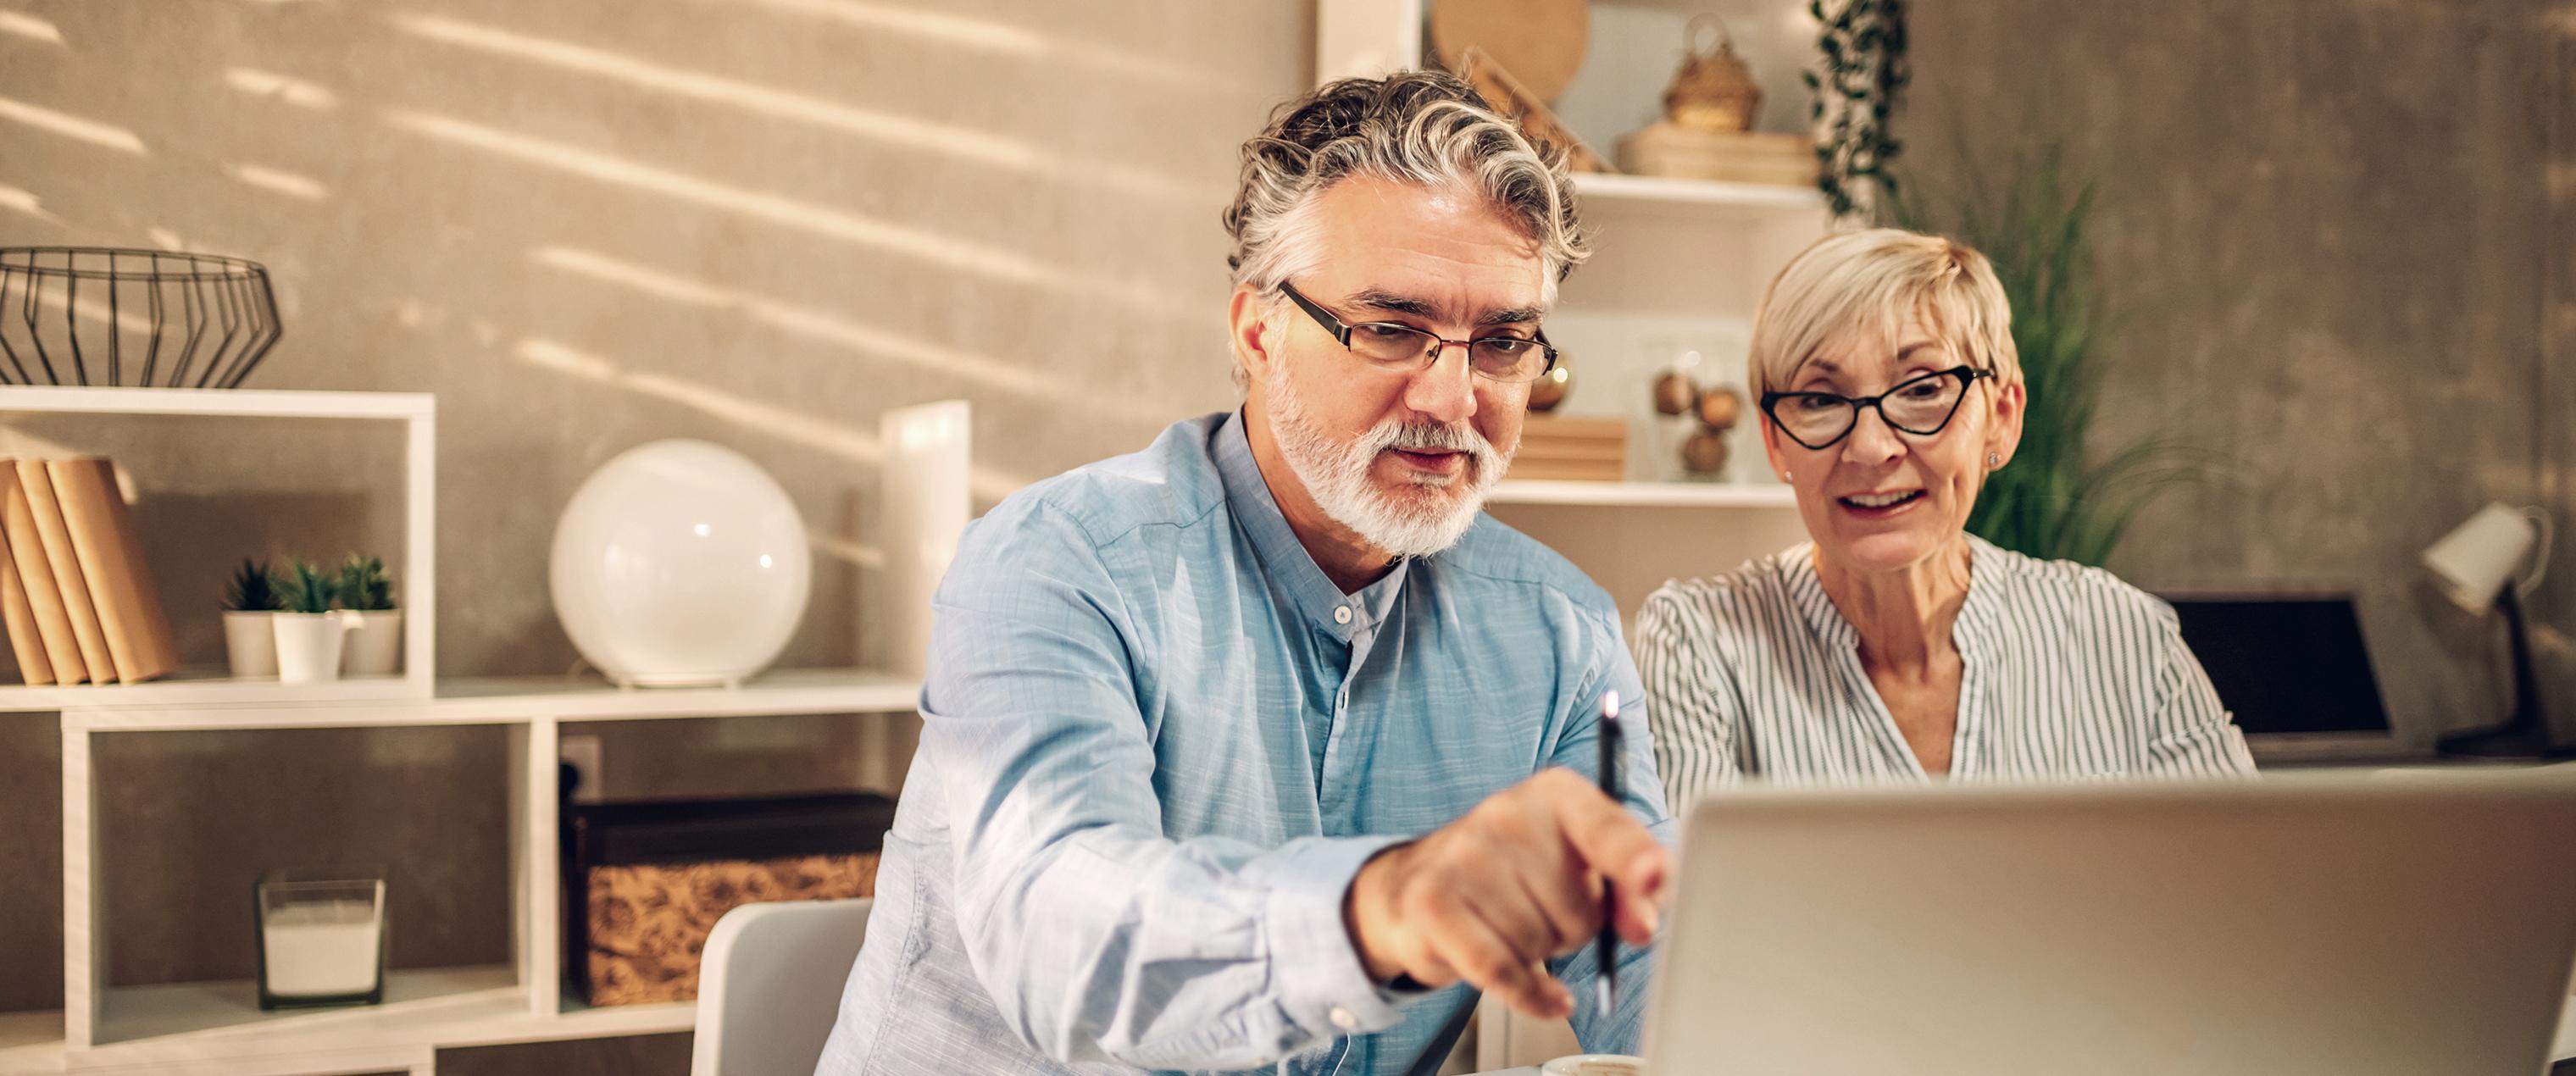 Elderly couple discussing finances while looking at computer together